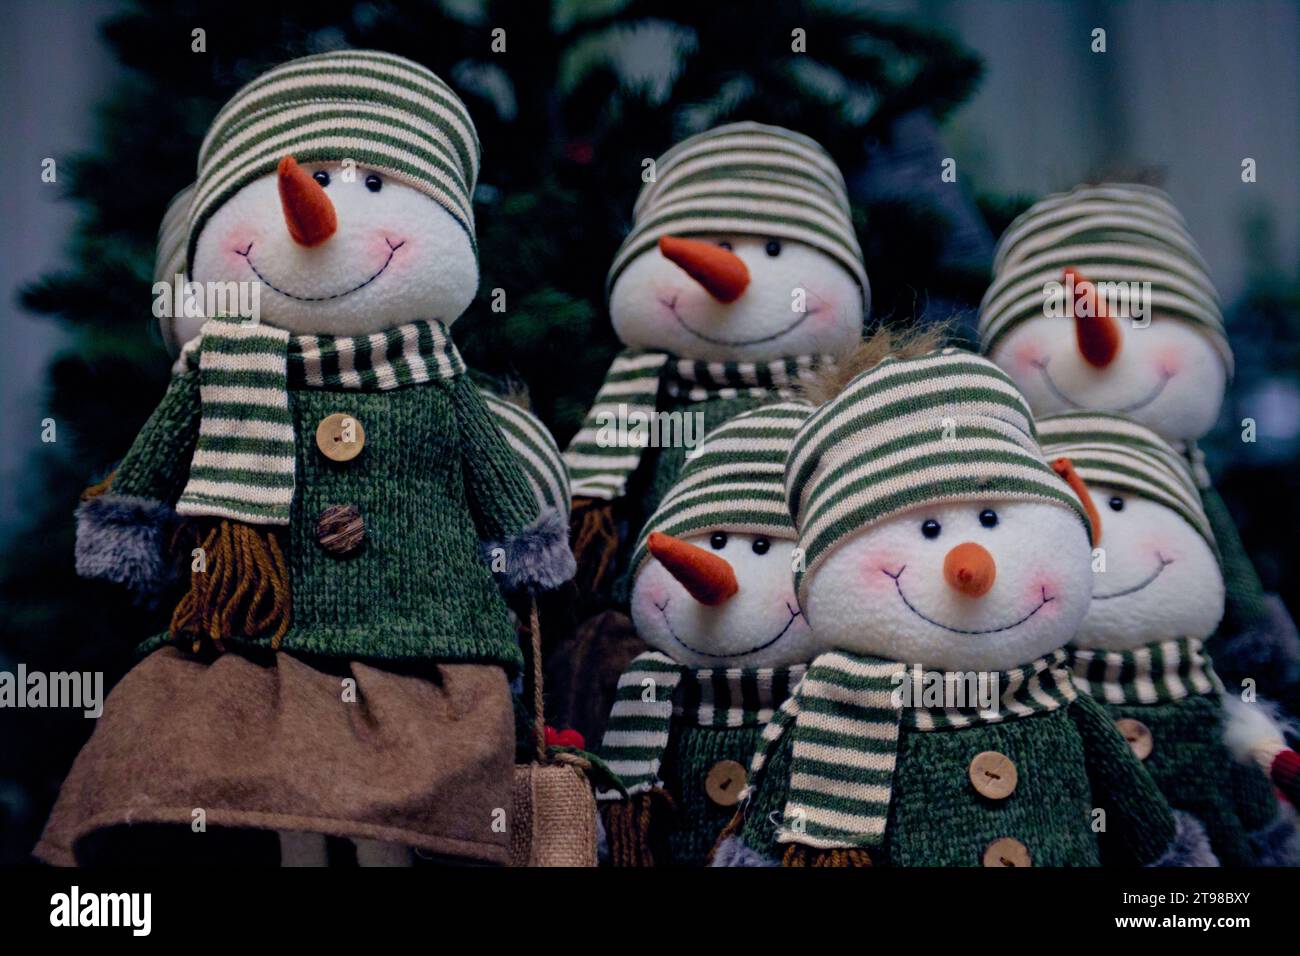 A group of snowmen with red carrot noses dressed in green sweaters, scarves and striped hats under the Christmas tree. Christmas decorations. Stock Photo